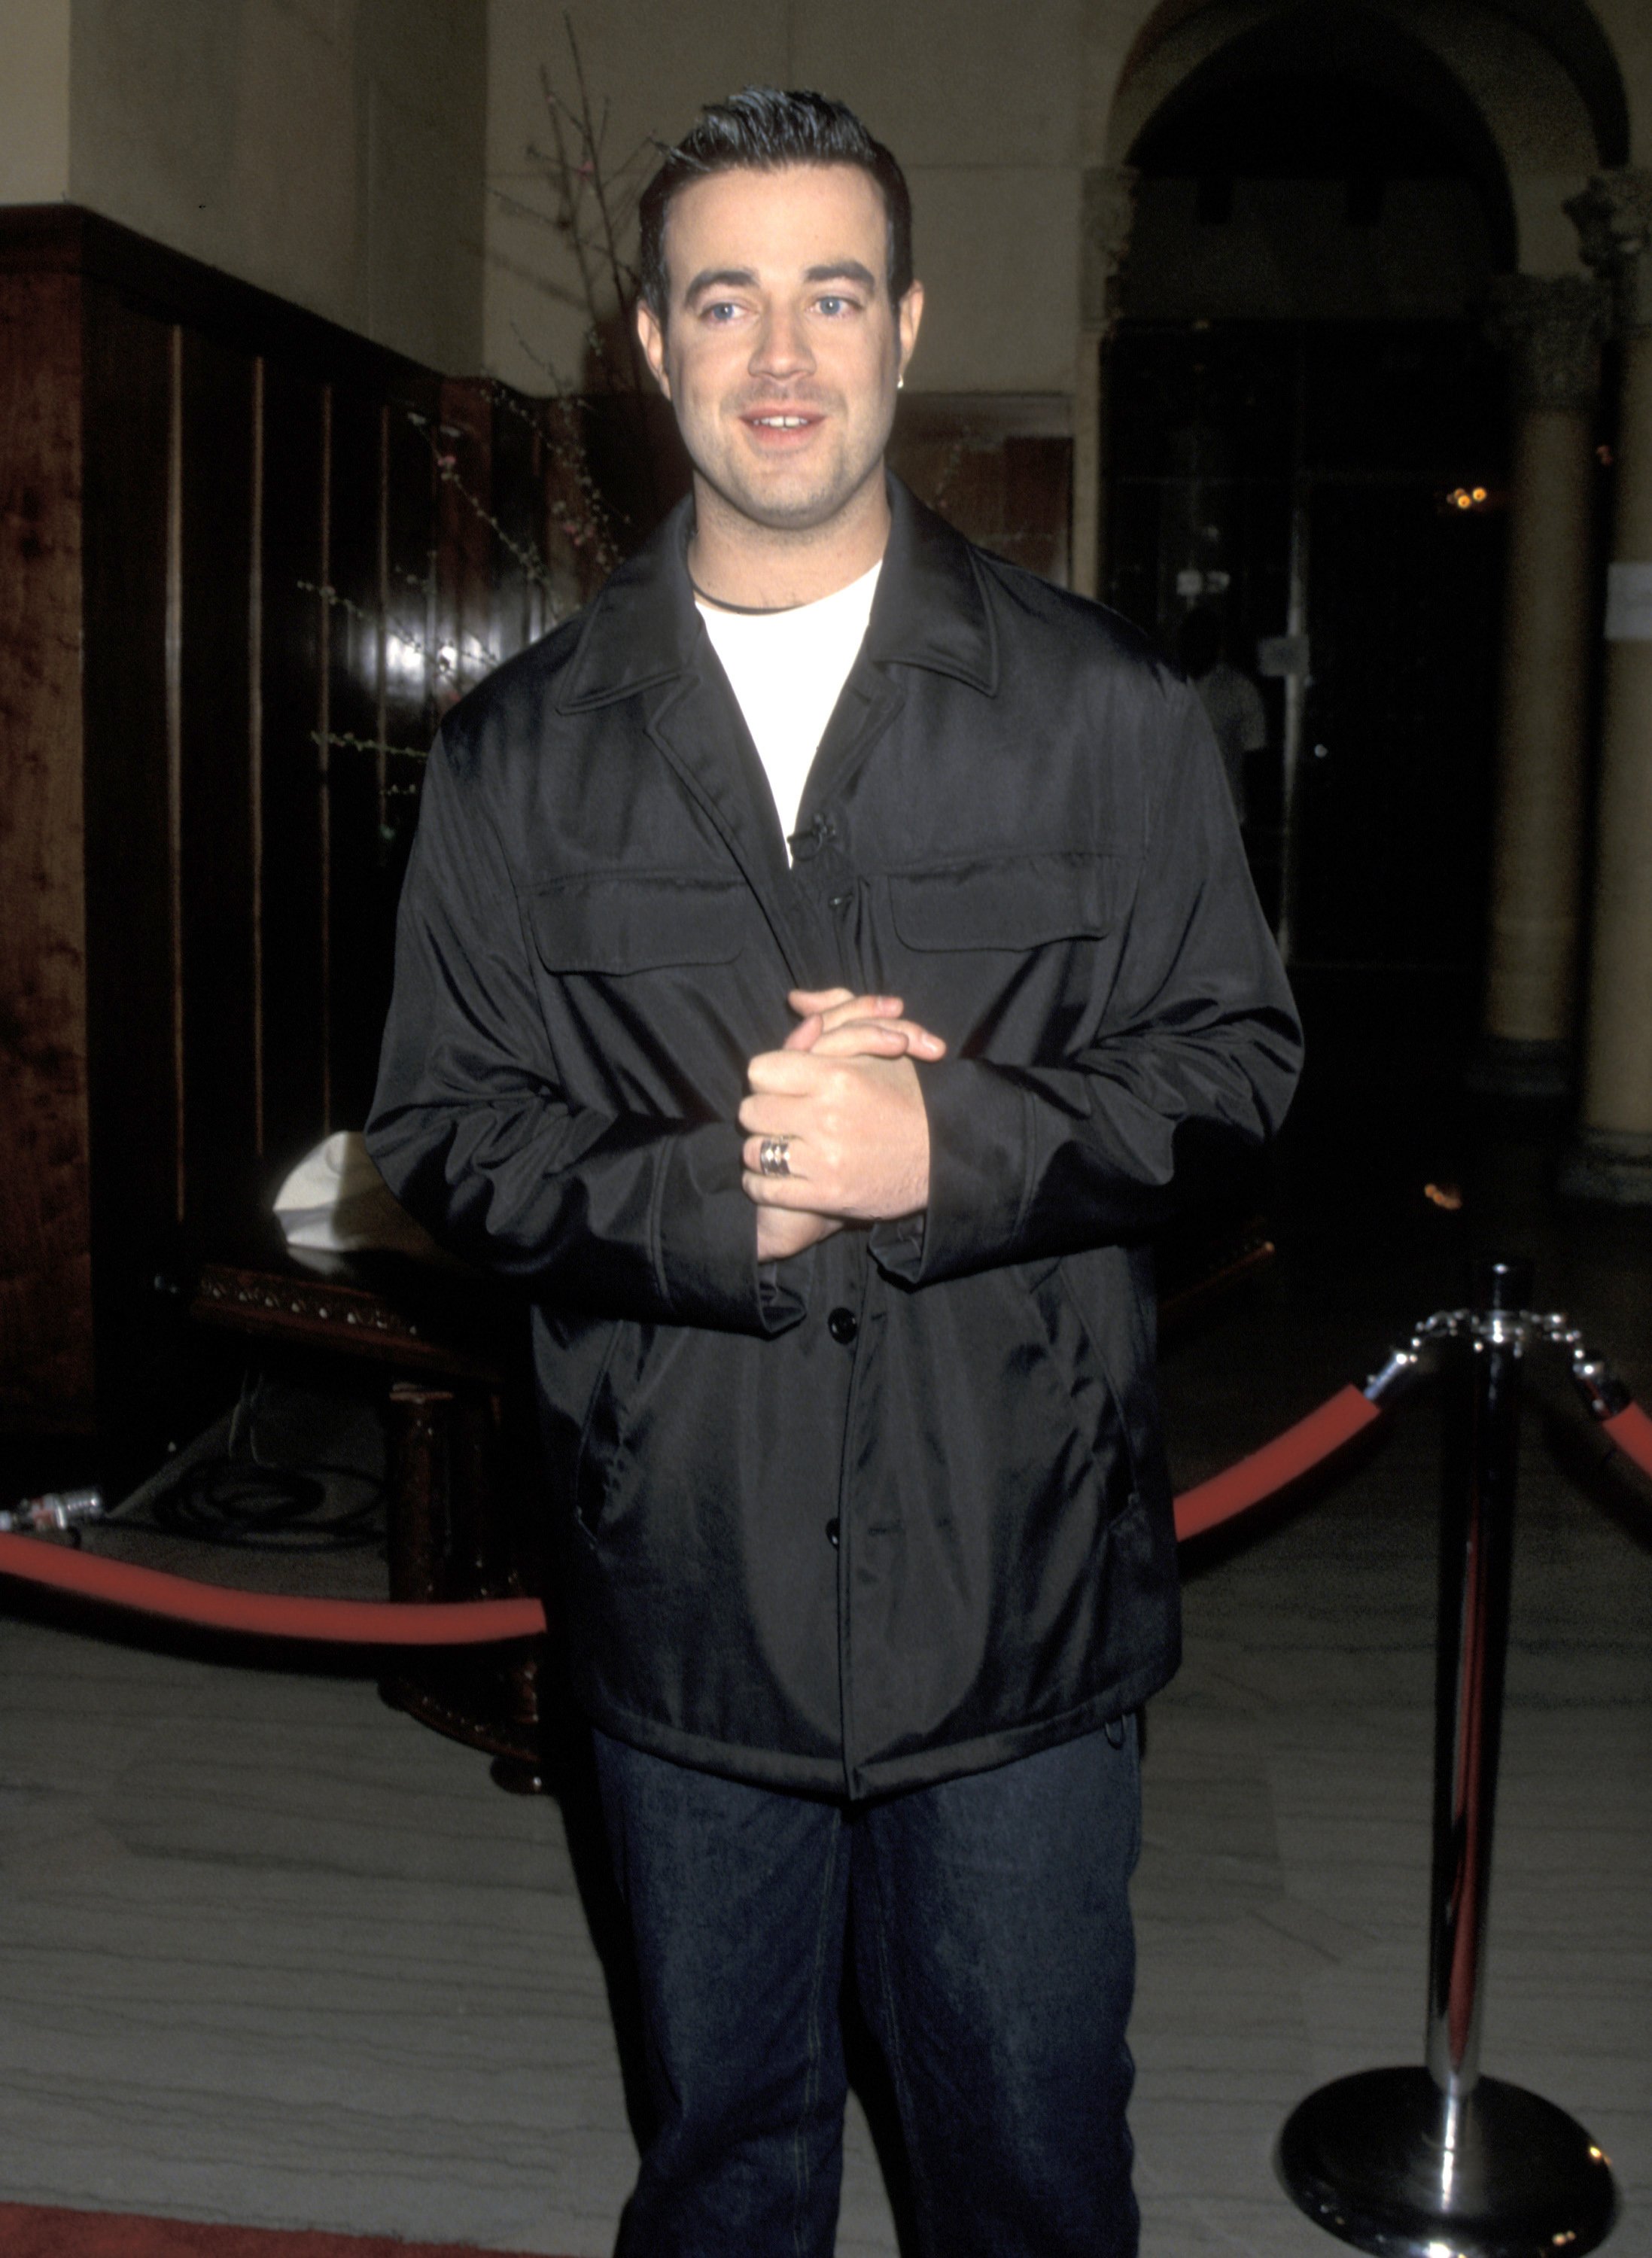 TV host Carson Daly at an MTV event for 'TRL' at Park Plaza Hotel in Los Angeles, California, United States, circa 2000. | Source: Getty Images